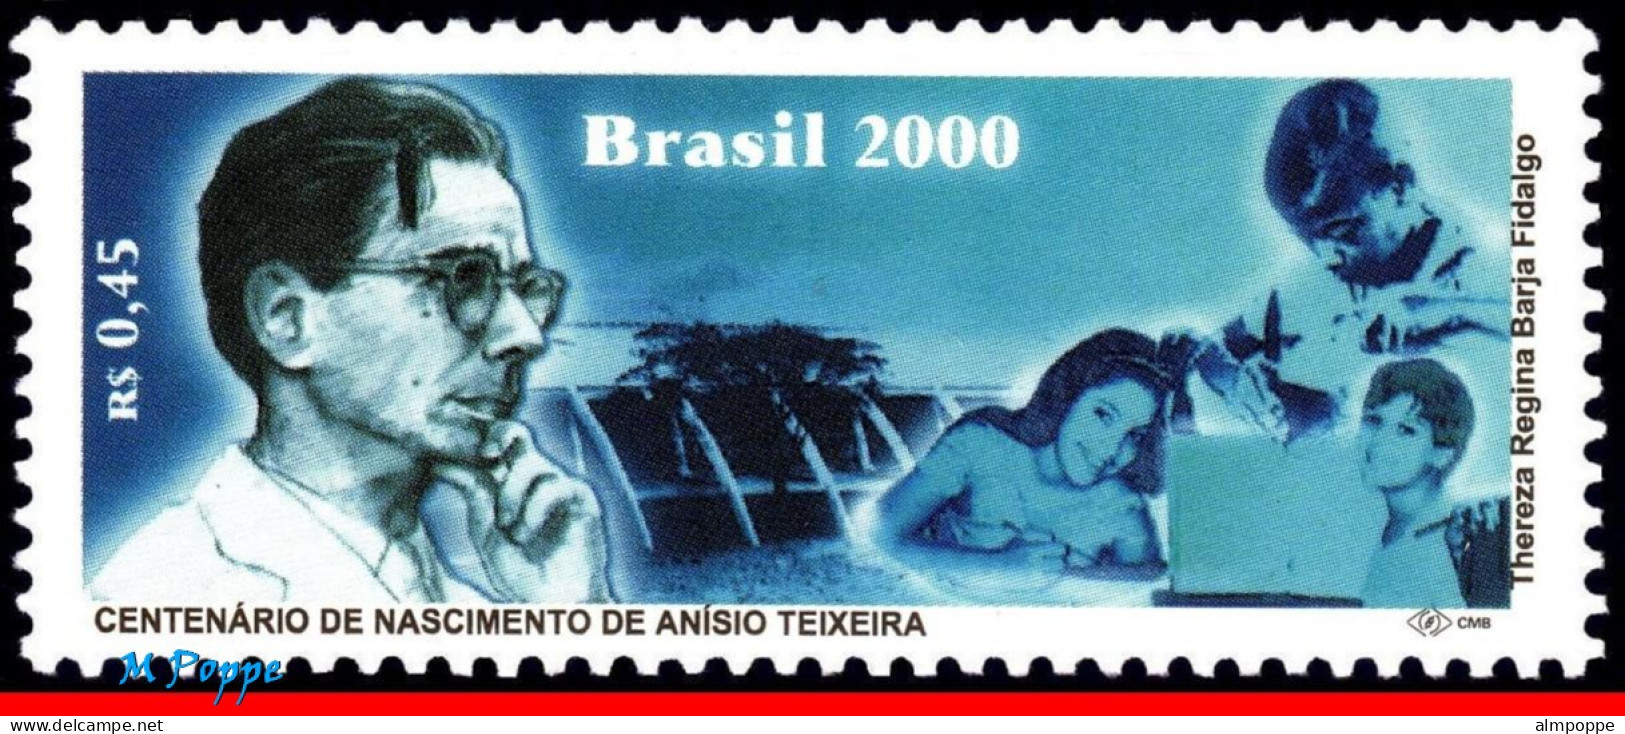 Ref. BR-2756 BRAZIL 2000 - ANISIO TEIXEIRA, EDUCATOR, SCIENCE, MI# 3050, MNH, FAMOUS PEOPLE 1V Sc# 2756 - Unused Stamps